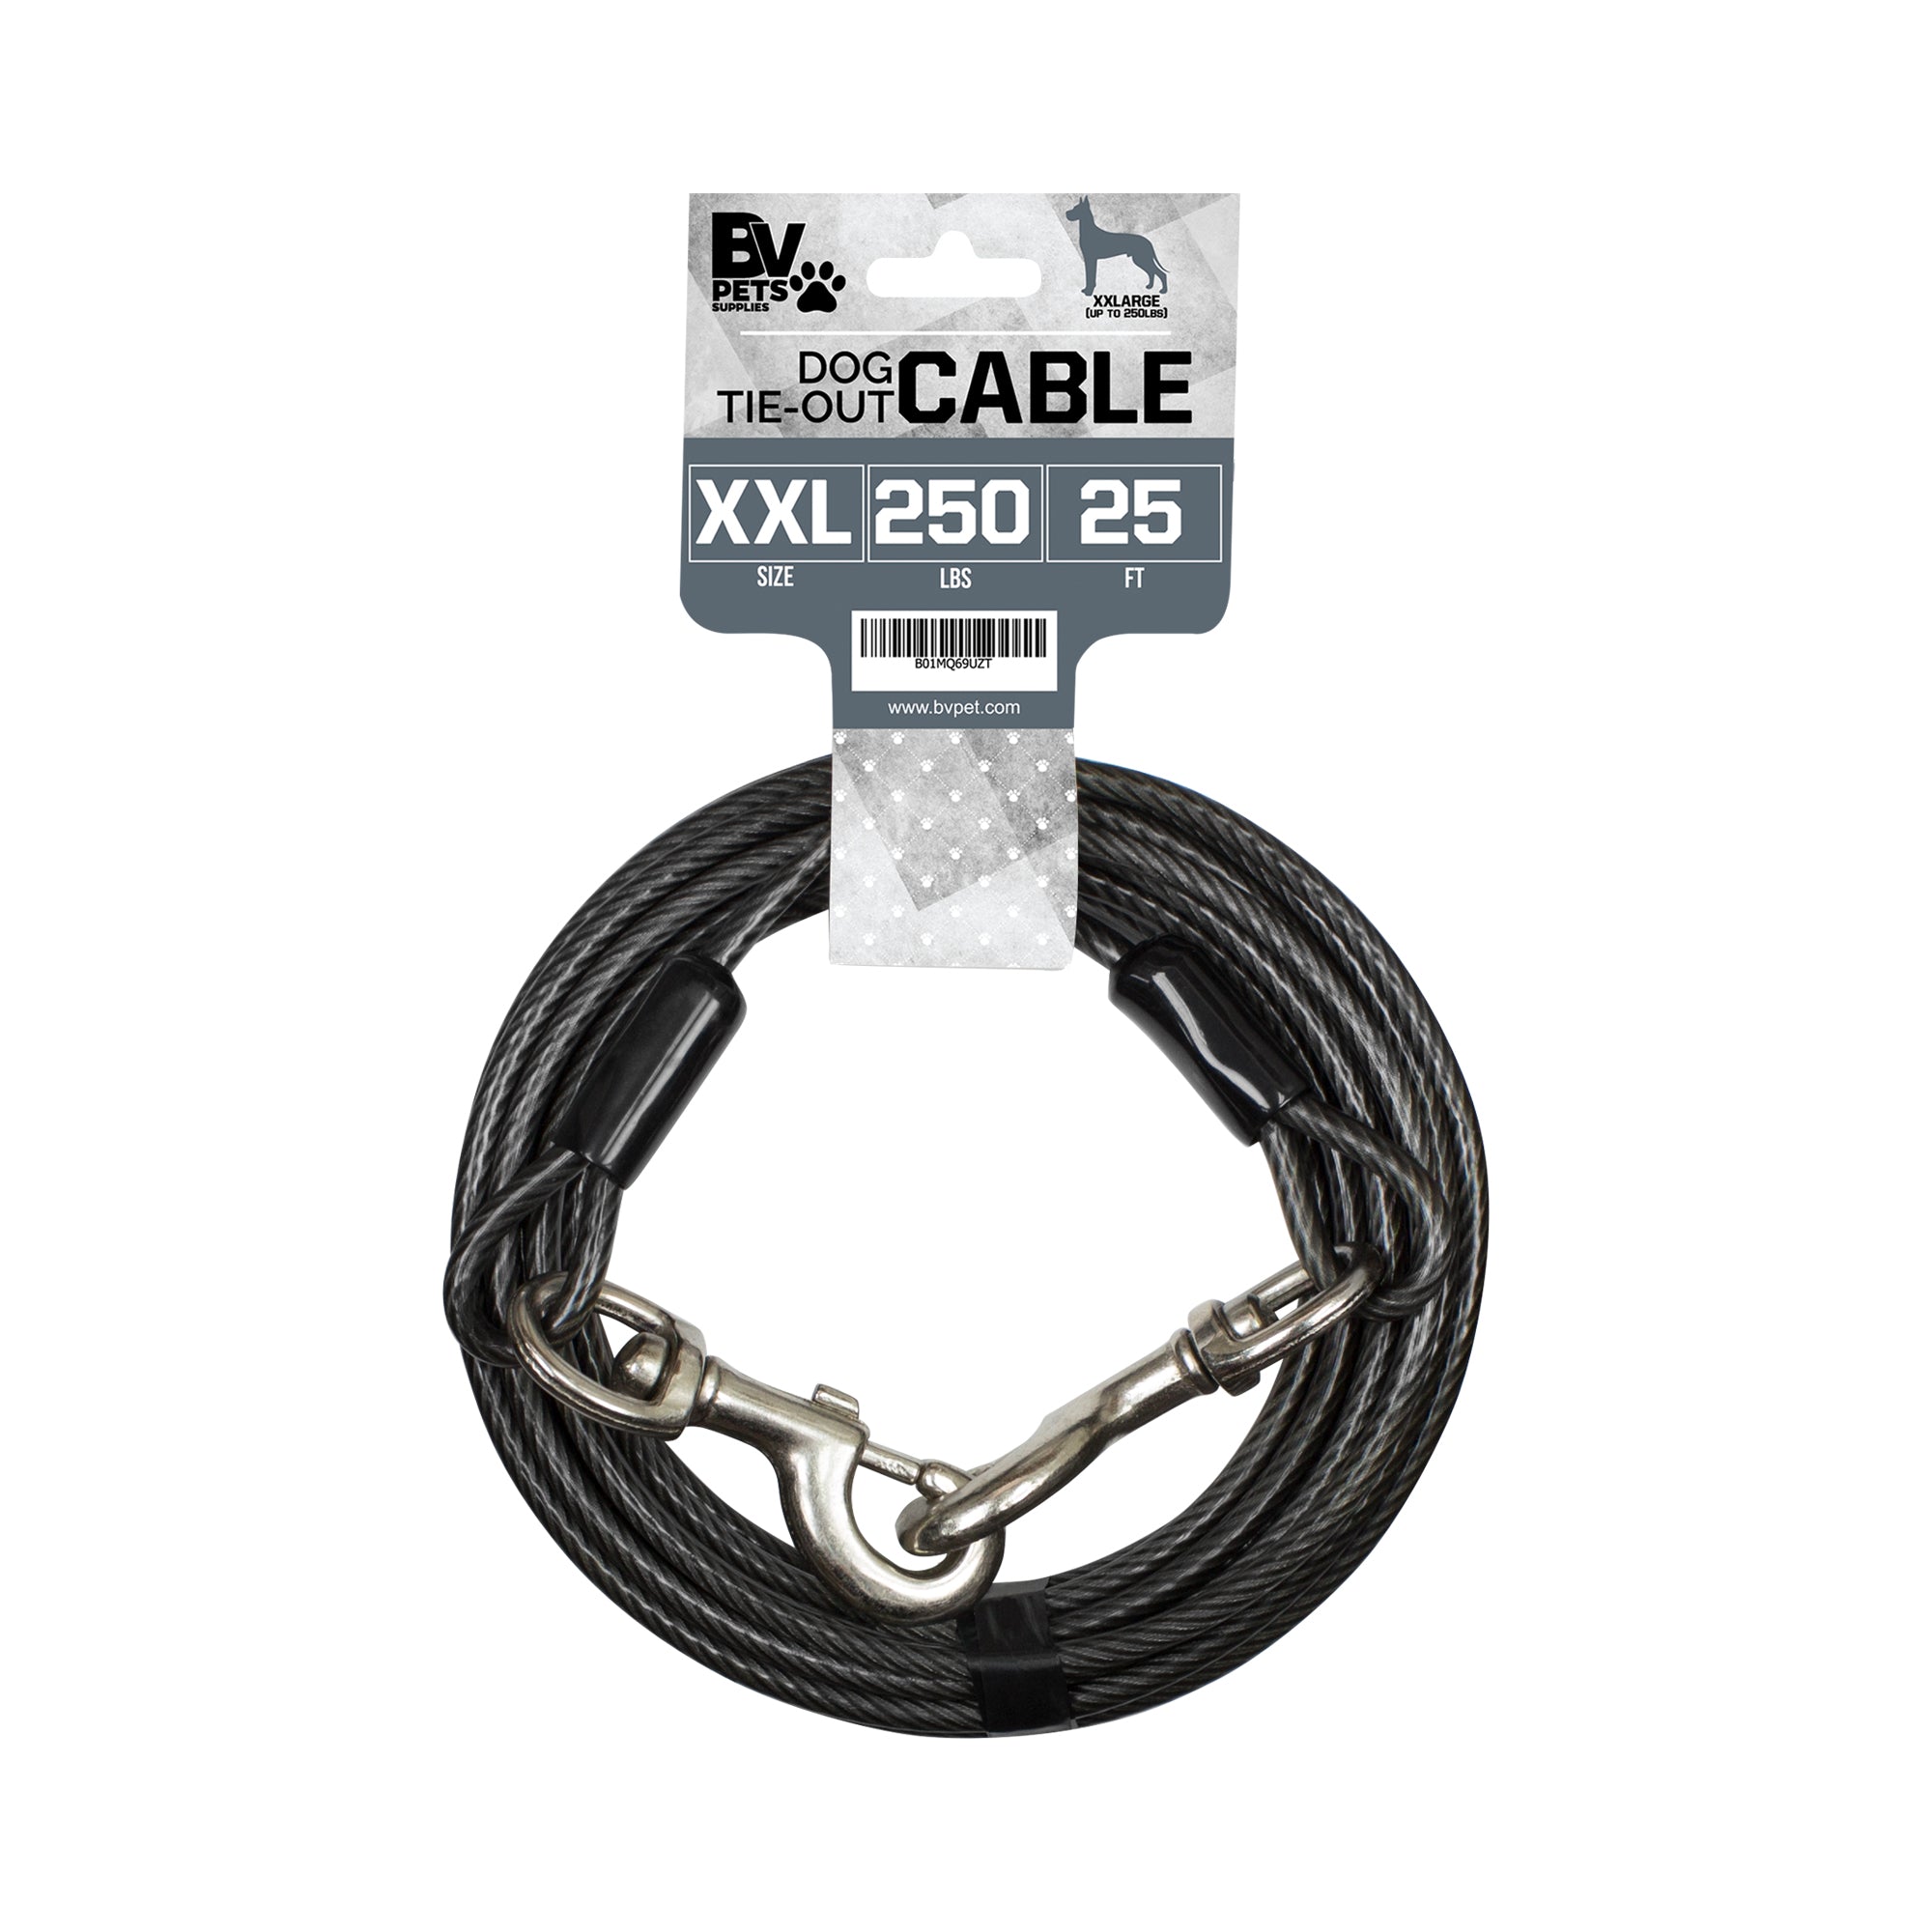 BV Pet XXL Tie Out Cable for Dogs up to 250Lbs - 25ft